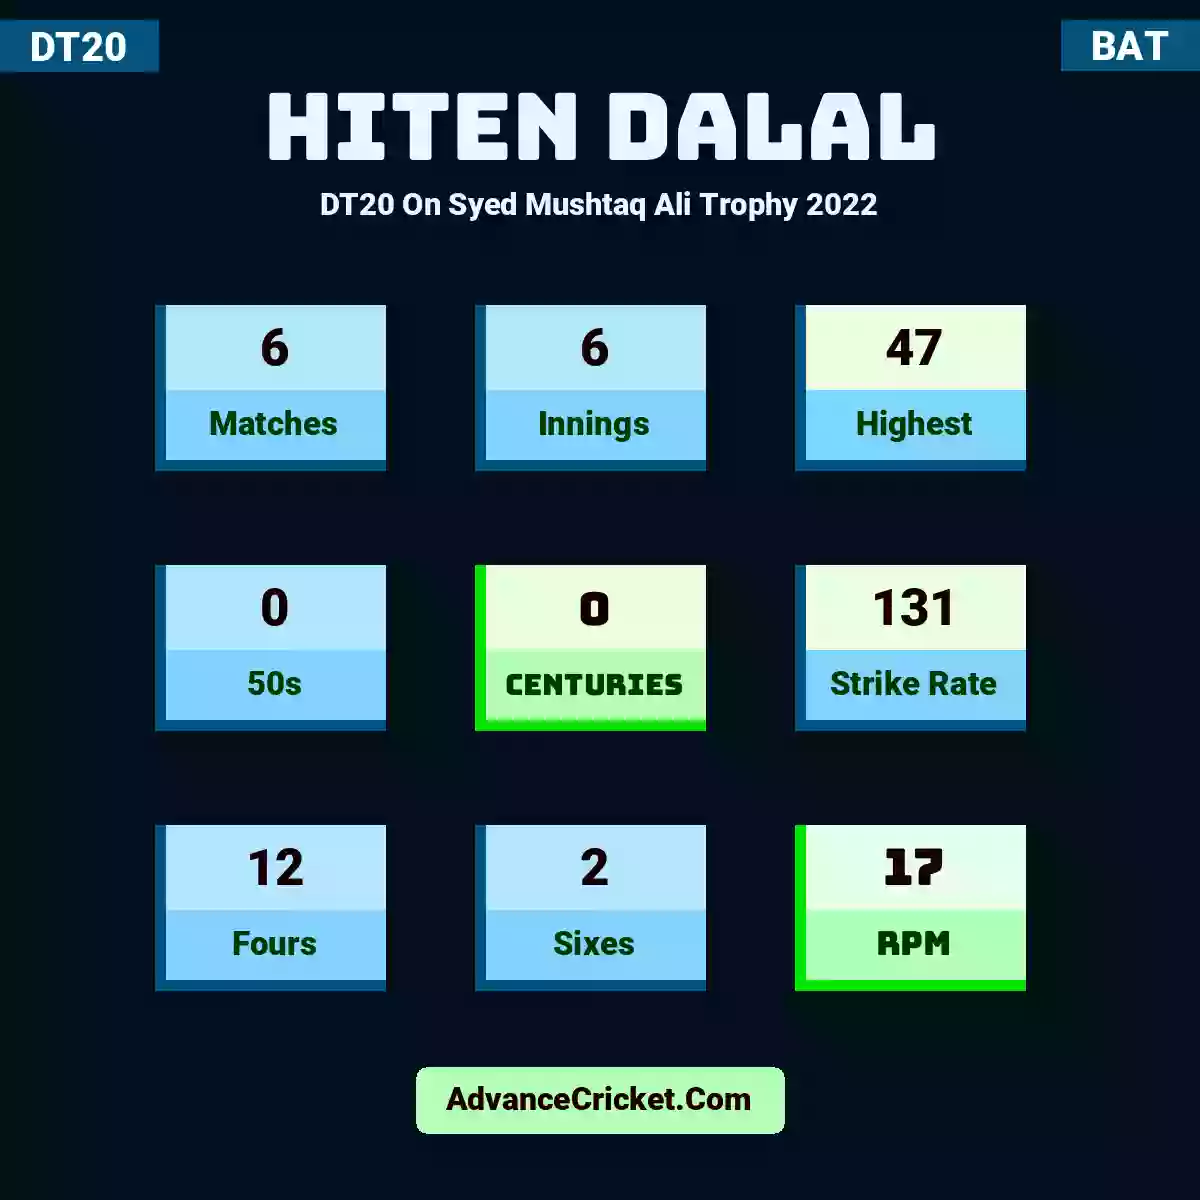 Hiten Dalal DT20  On Syed Mushtaq Ali Trophy 2022, Hiten Dalal played 6 matches, scored 47 runs as highest, 0 half-centuries, and 0 centuries, with a strike rate of 131. H.Dalal hit 12 fours and 2 sixes, with an RPM of 17.